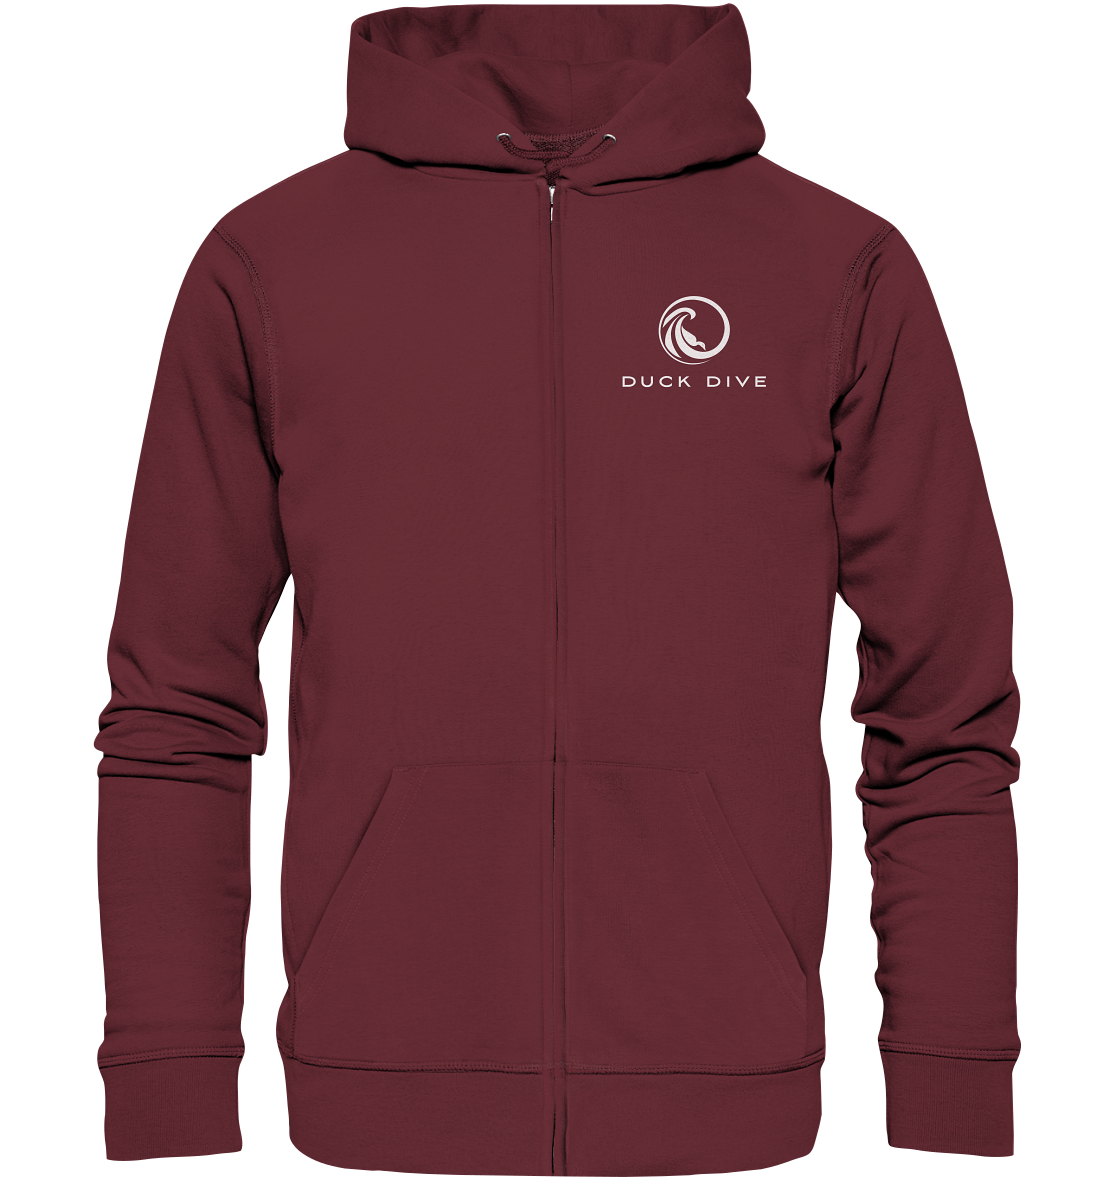 Hoodie - Only Good Vibes - Organic Zipper - Duck Dive Clothing